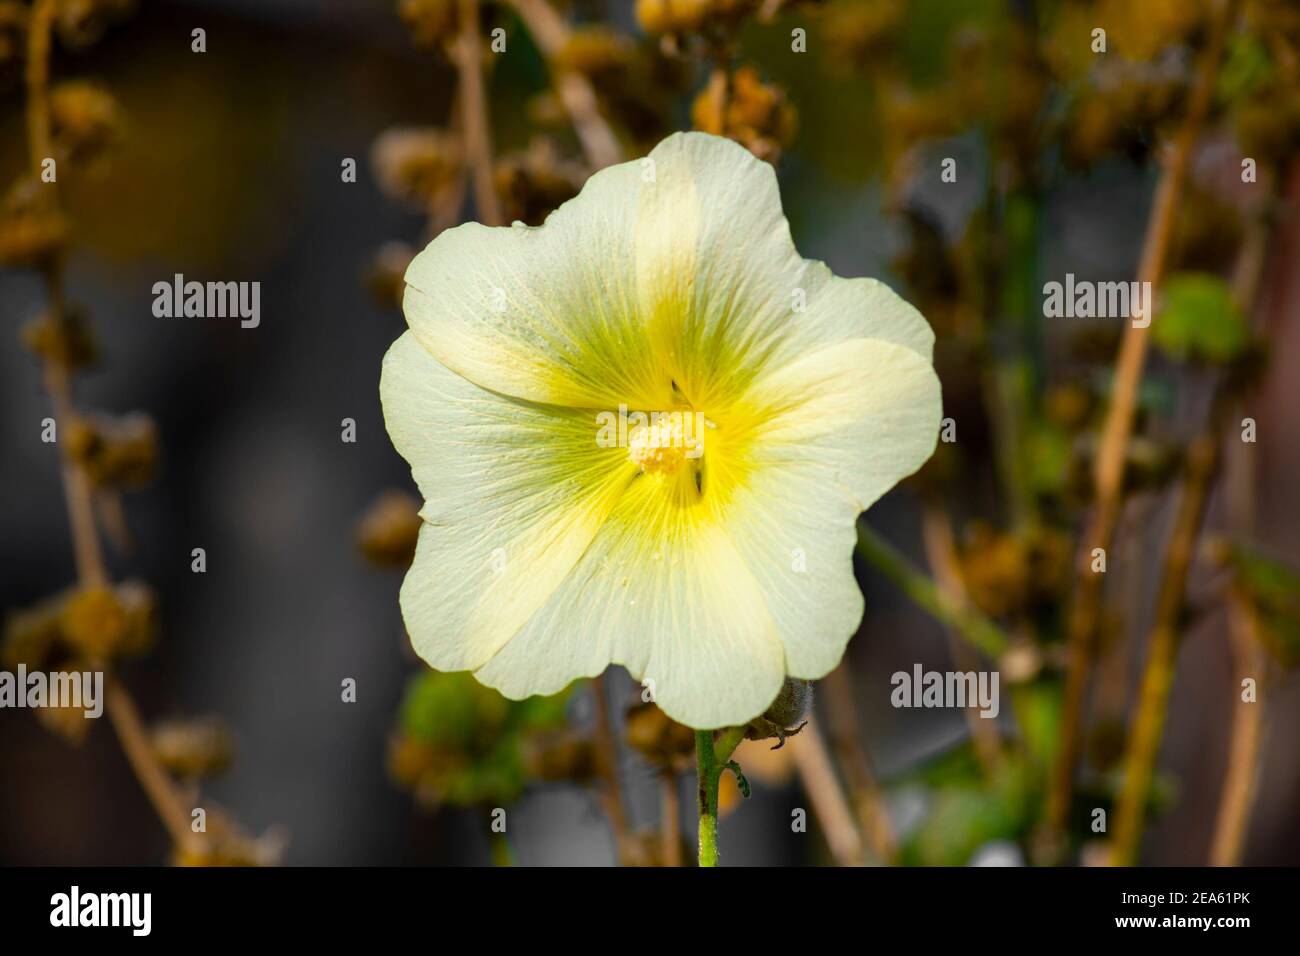 Malvaceae Family. Front view on dark green background. Stock Photo